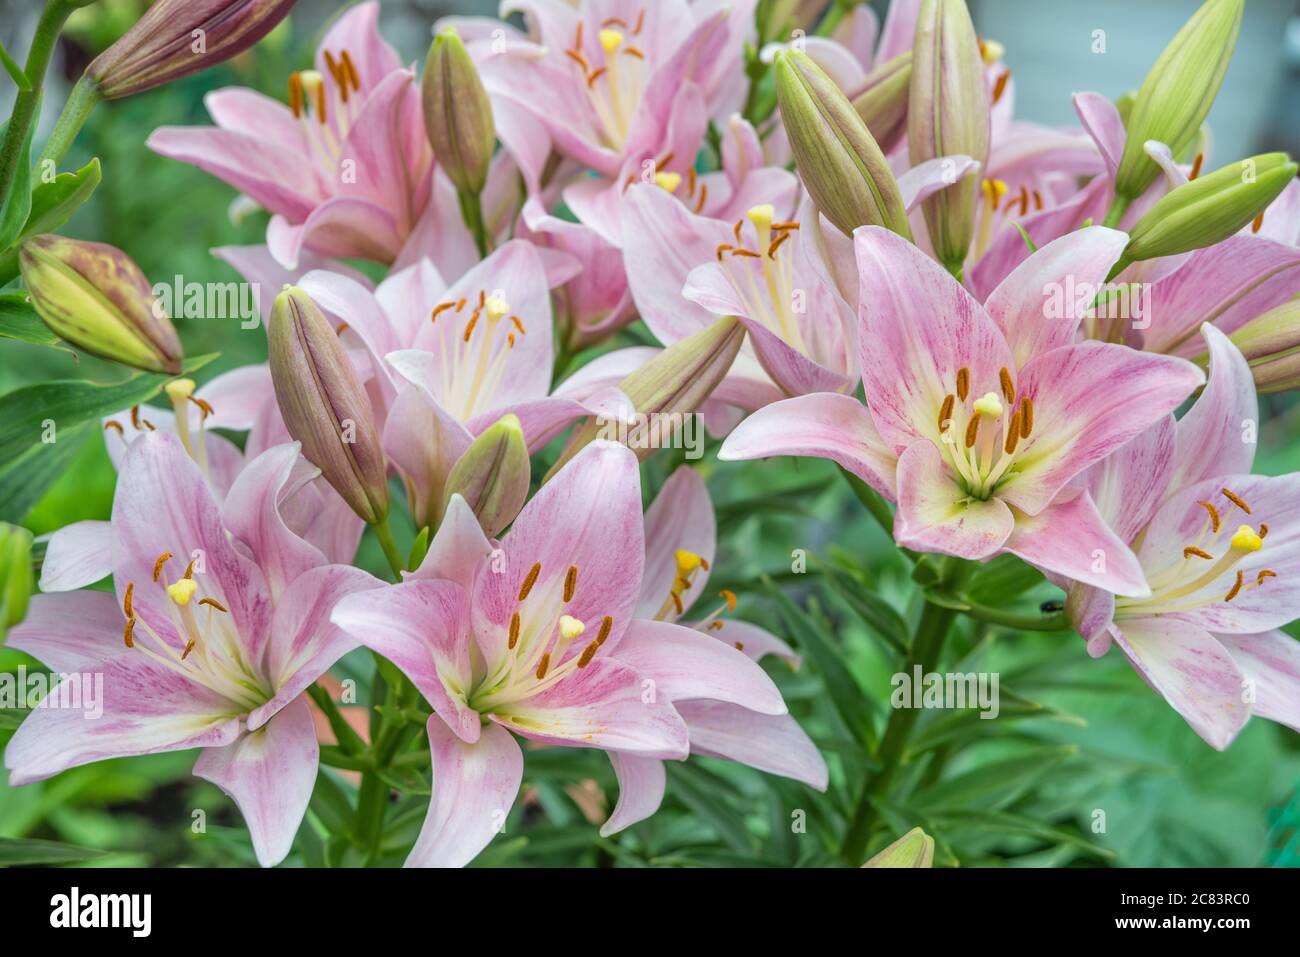 Many large flowers of  pink lilies outdoors close-up Stock Photo